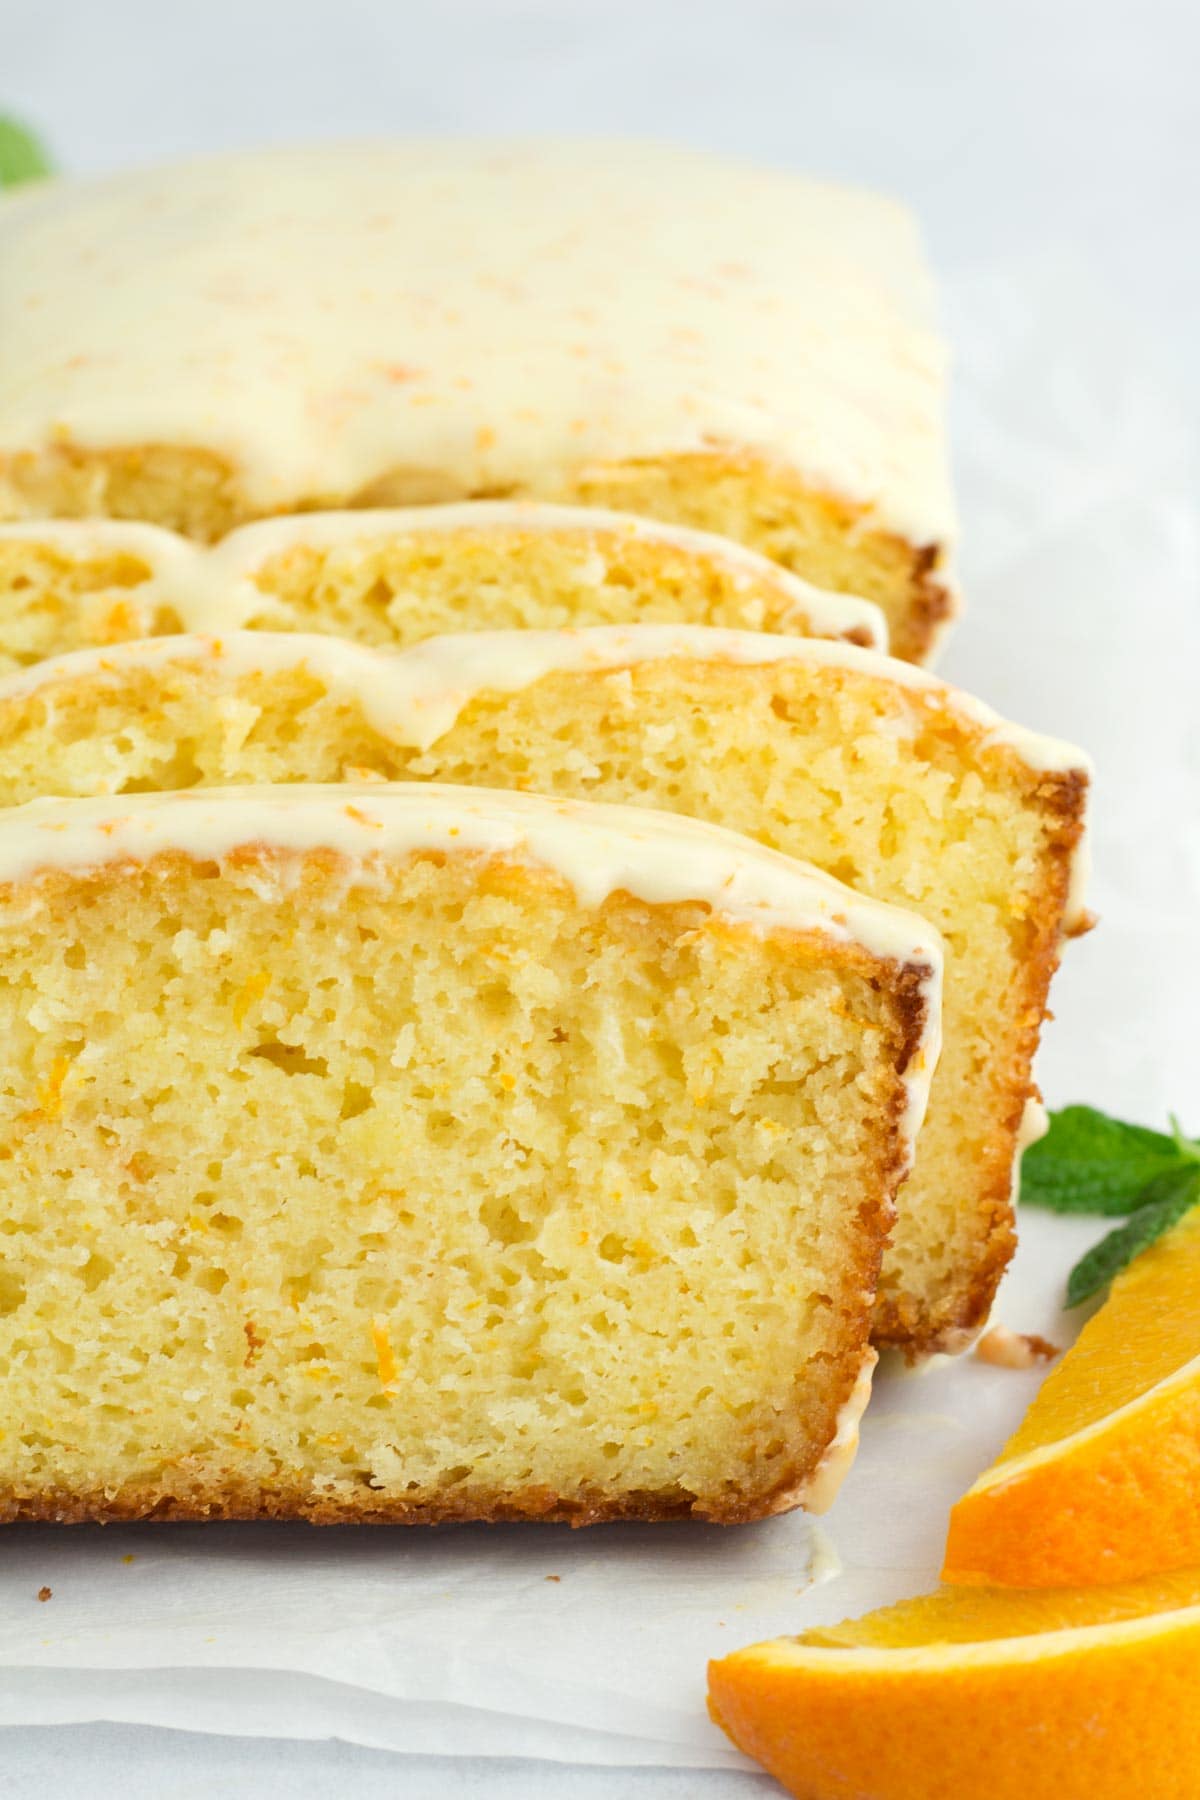 Staggered slices of orange loaf cake with glaze dripping off sides.